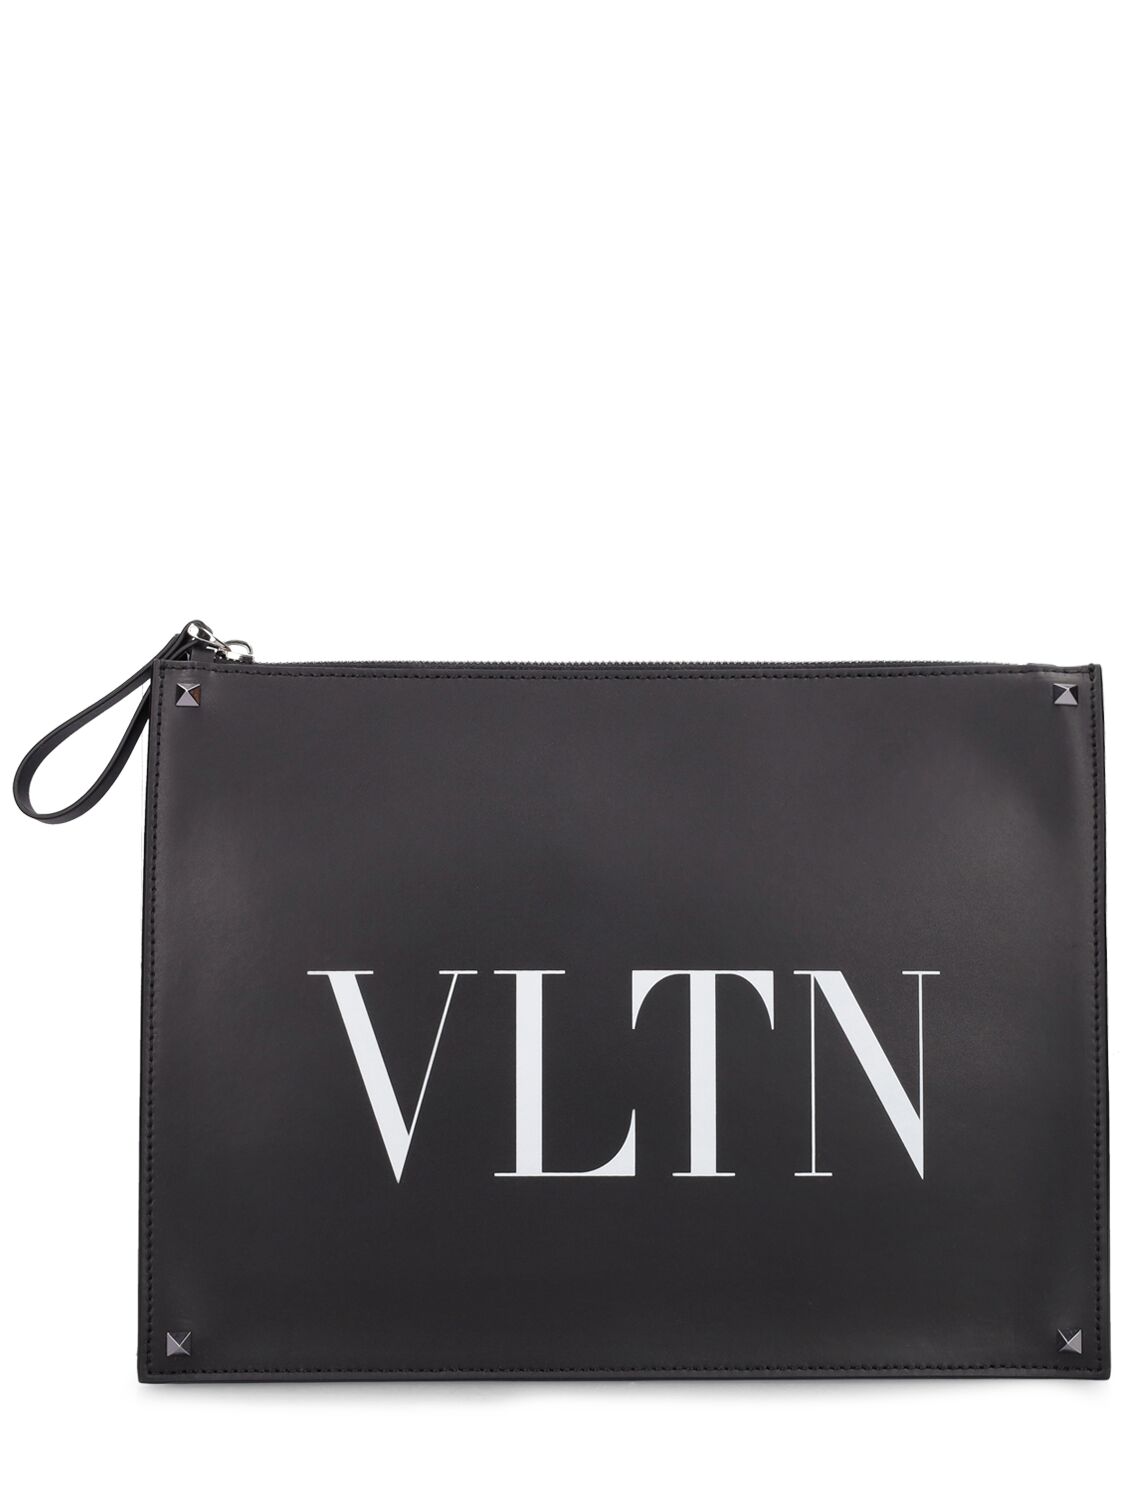 Image of Vltn Leather Pouch